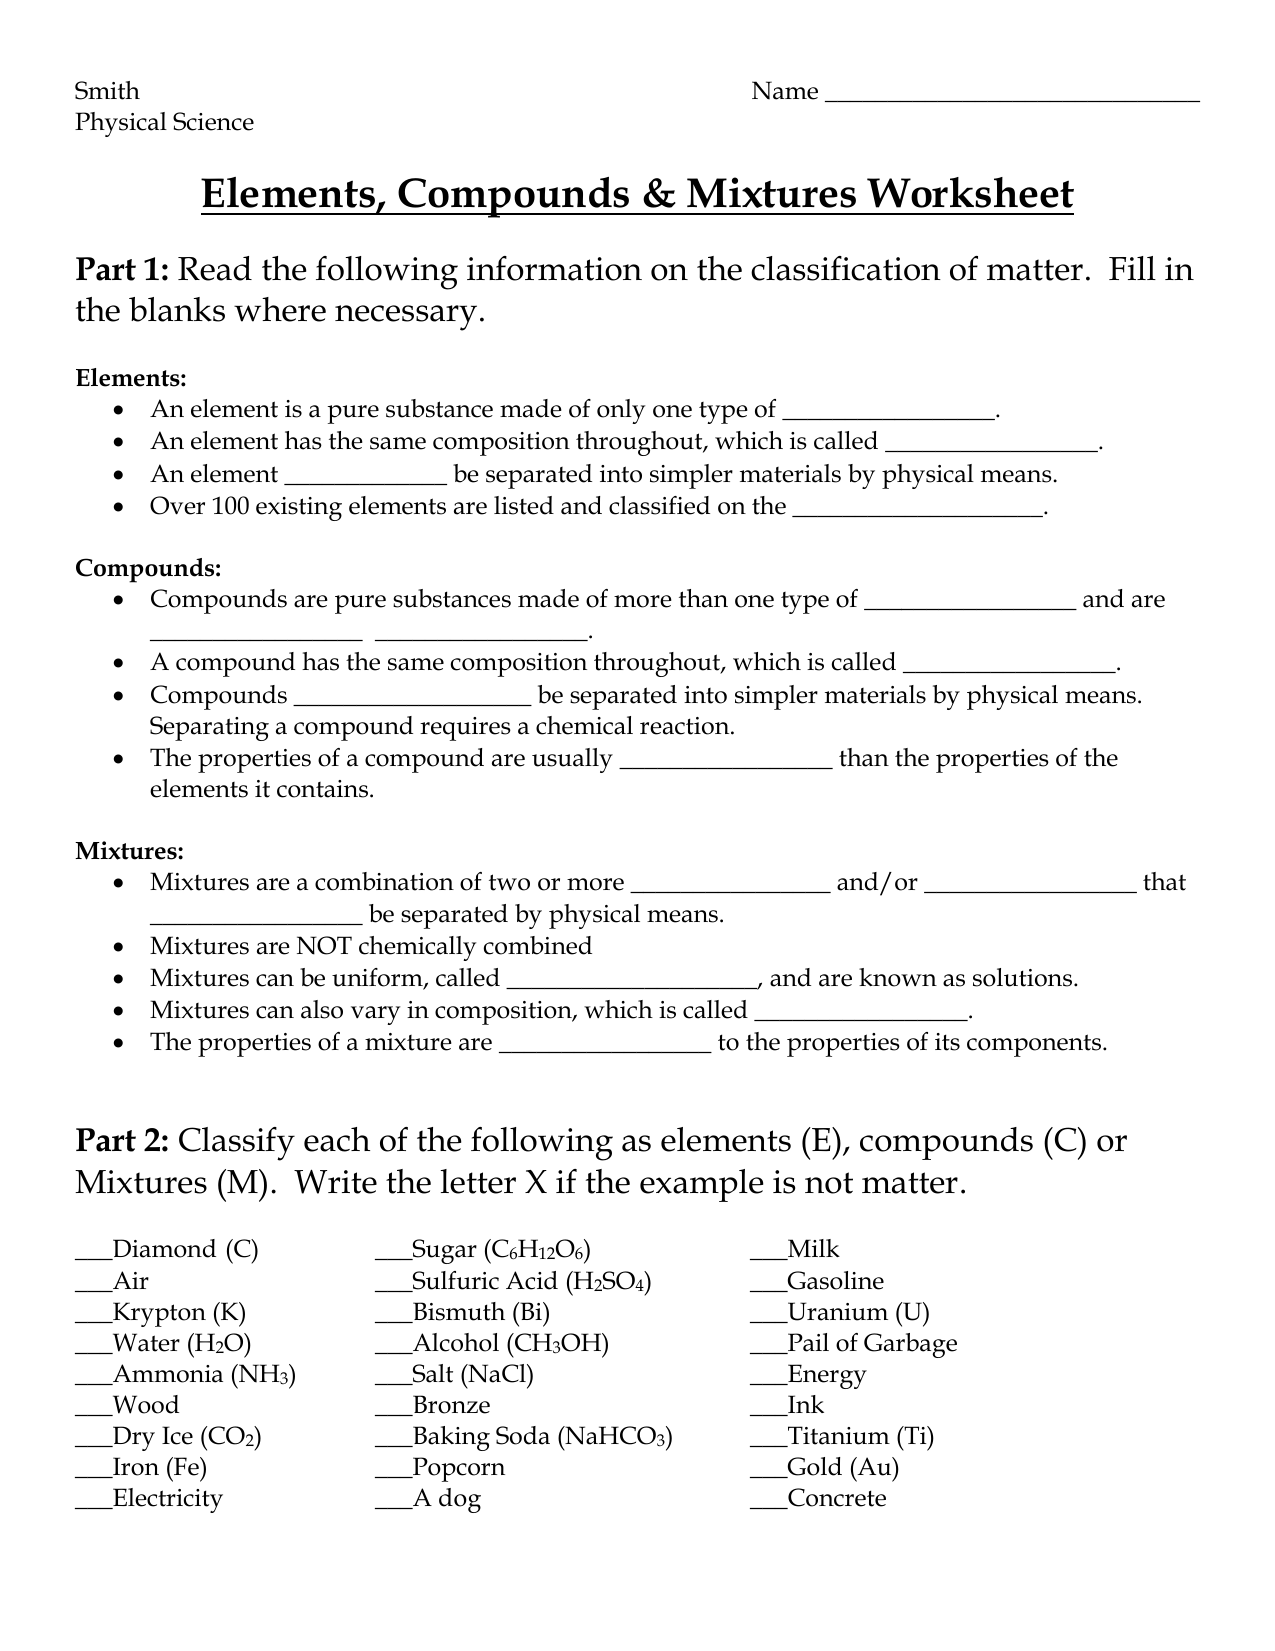 Elements, Compounds & Mixtures Worksheet With Composition Of Matter Worksheet Answers